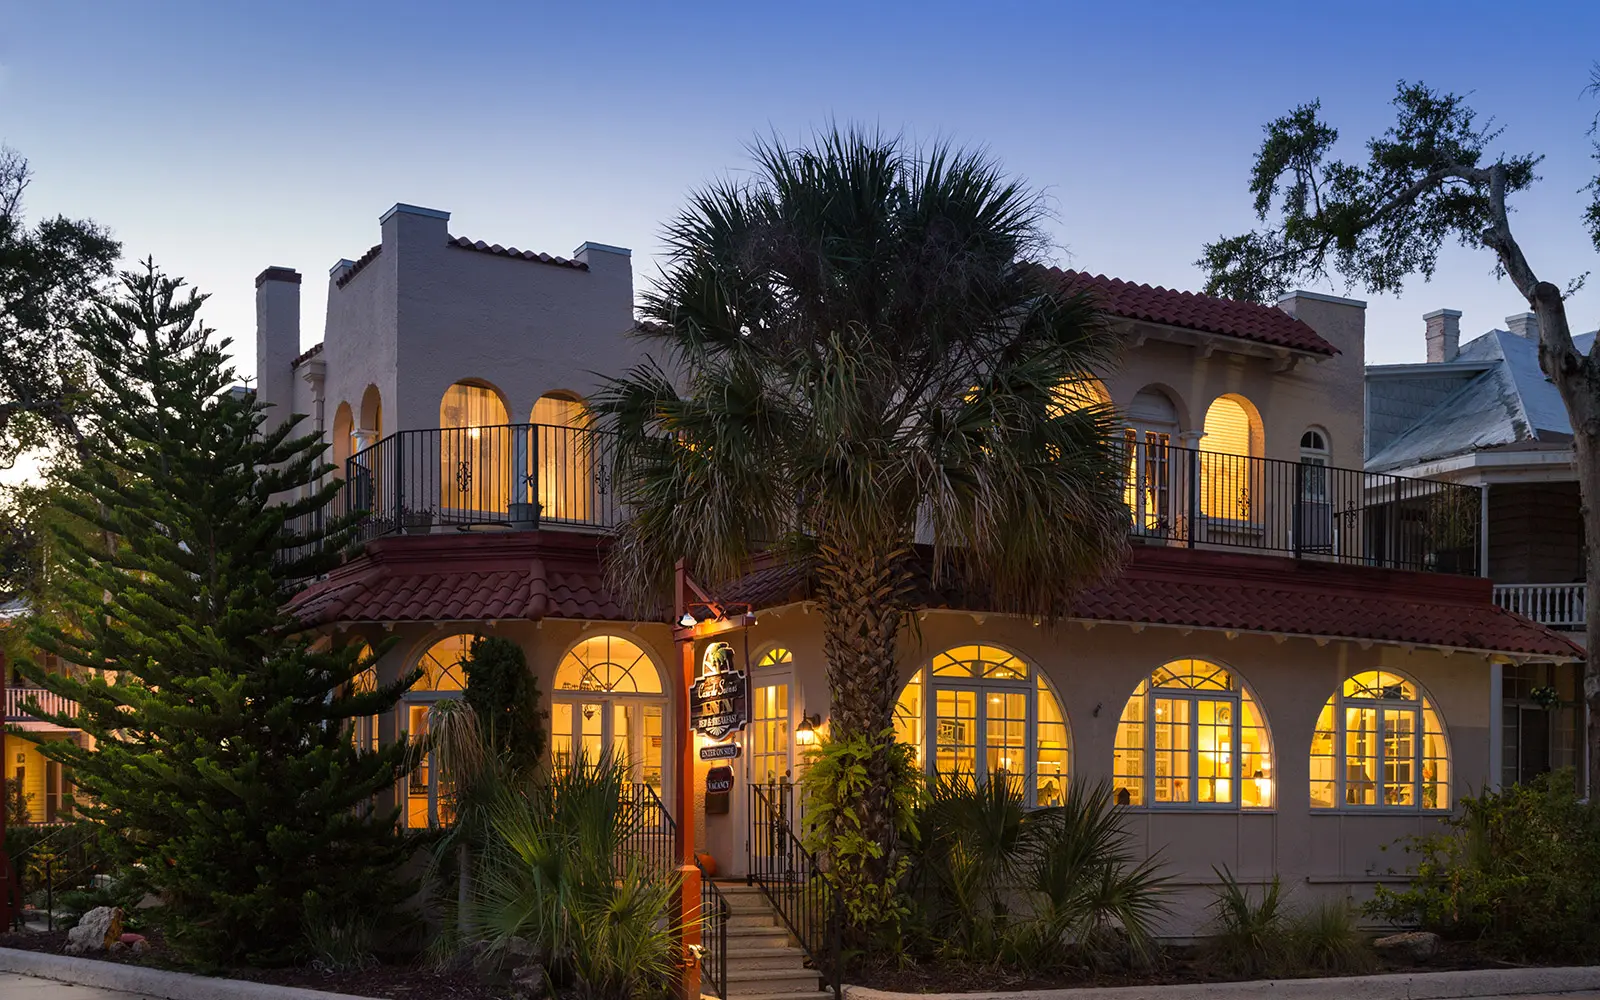 Winter in Florida, join us at our St. Augustine bed and breakfast for a romantic getaway